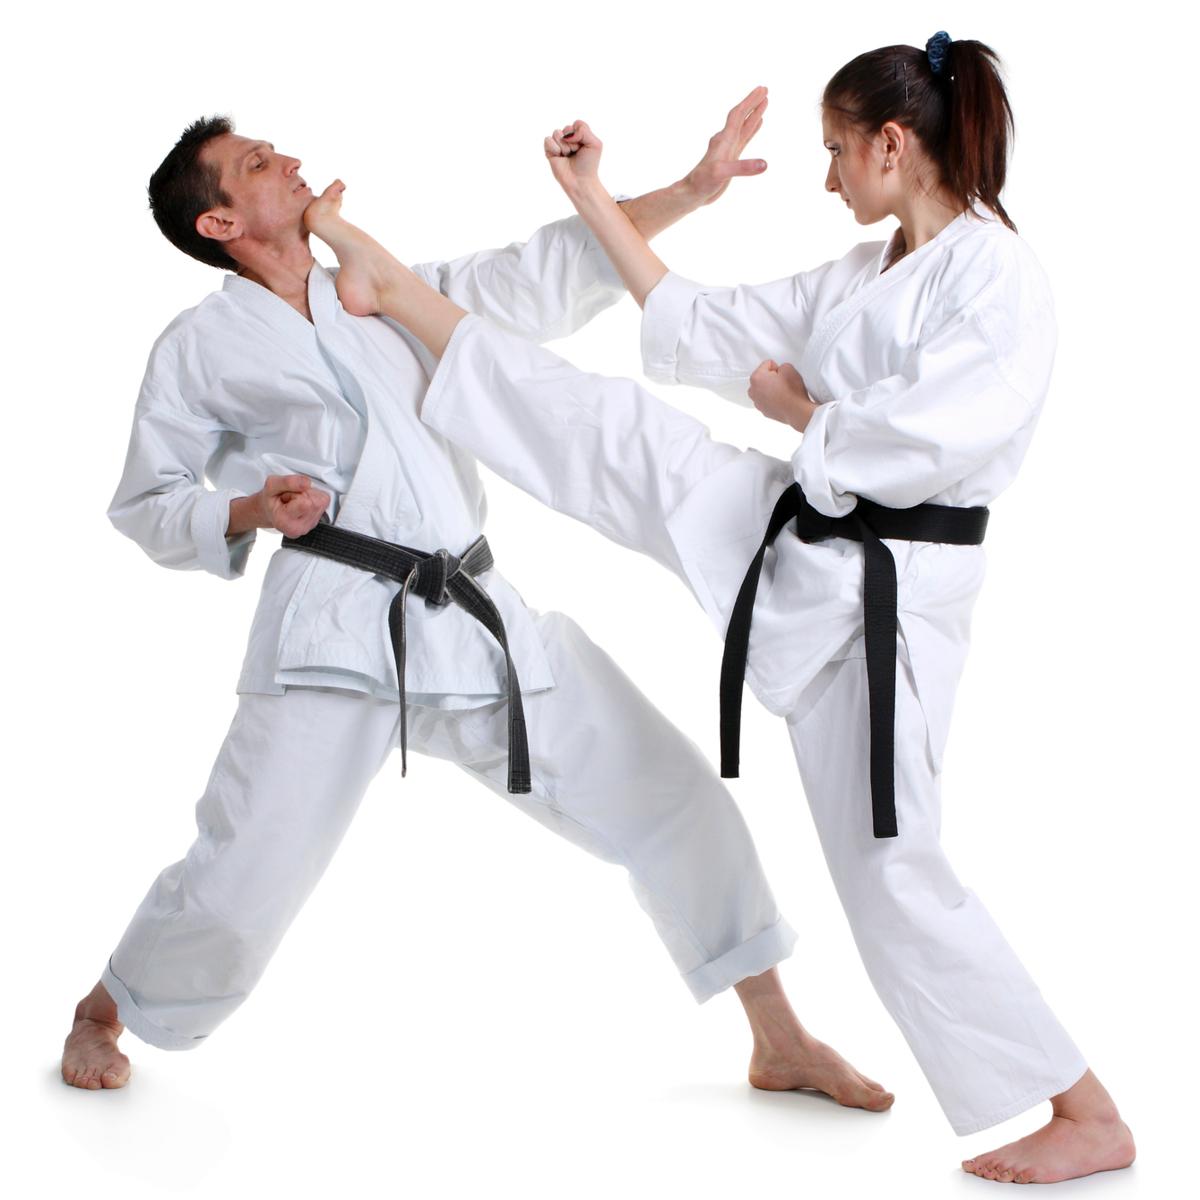 Karate Moves - A Guide to the Basic Blocks, Strikes, and Kicks ...